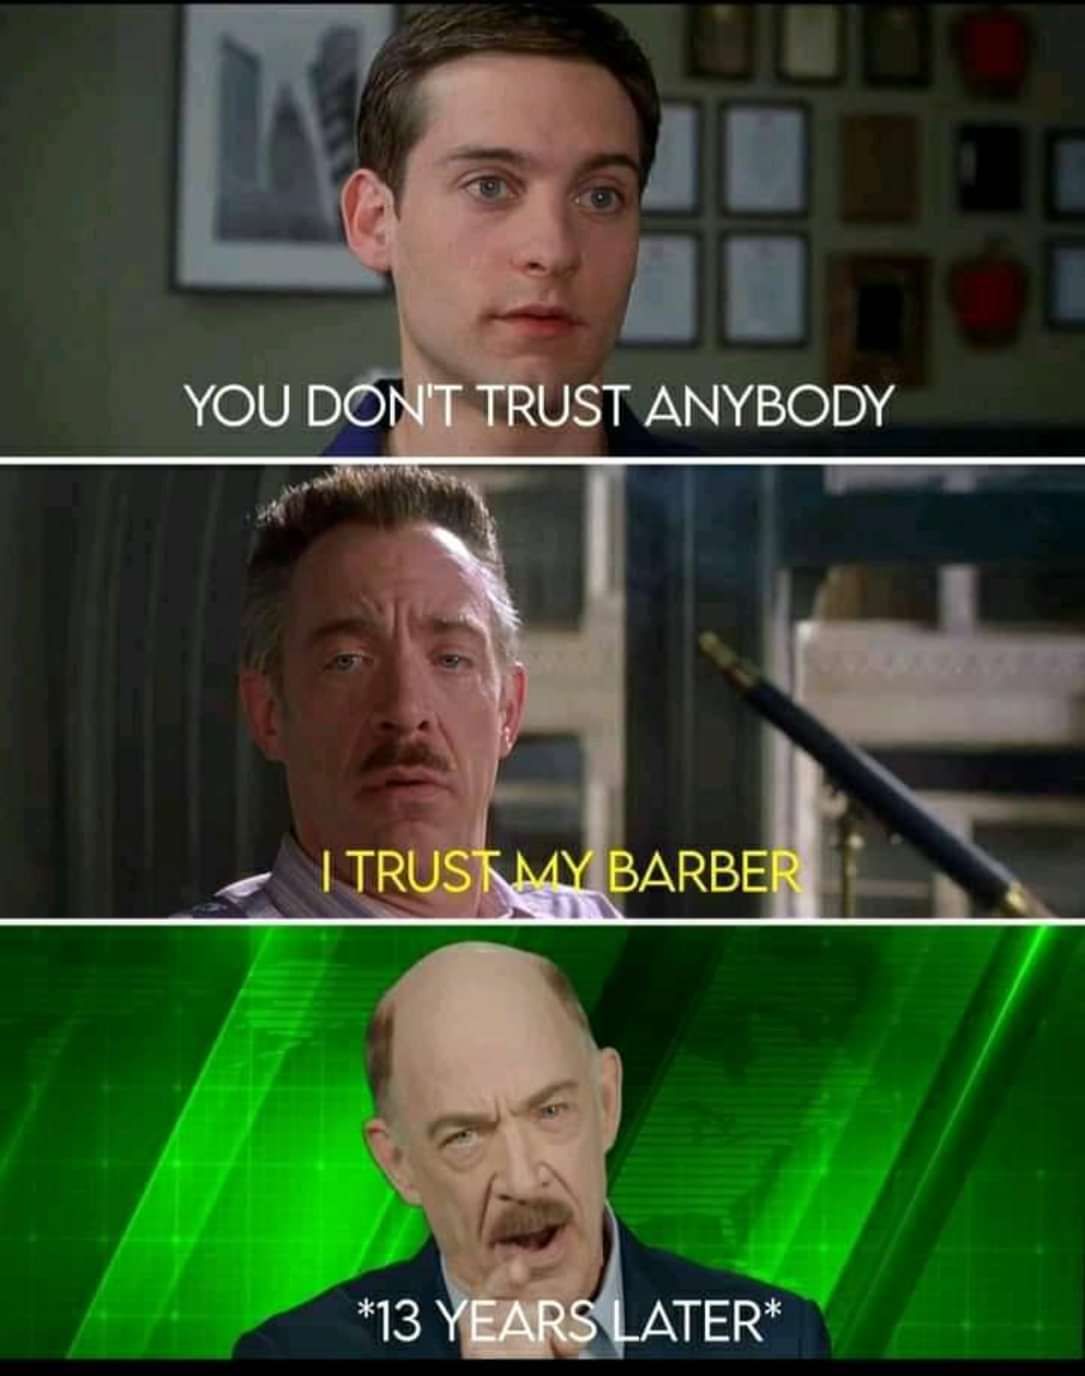 But why trust Barber?